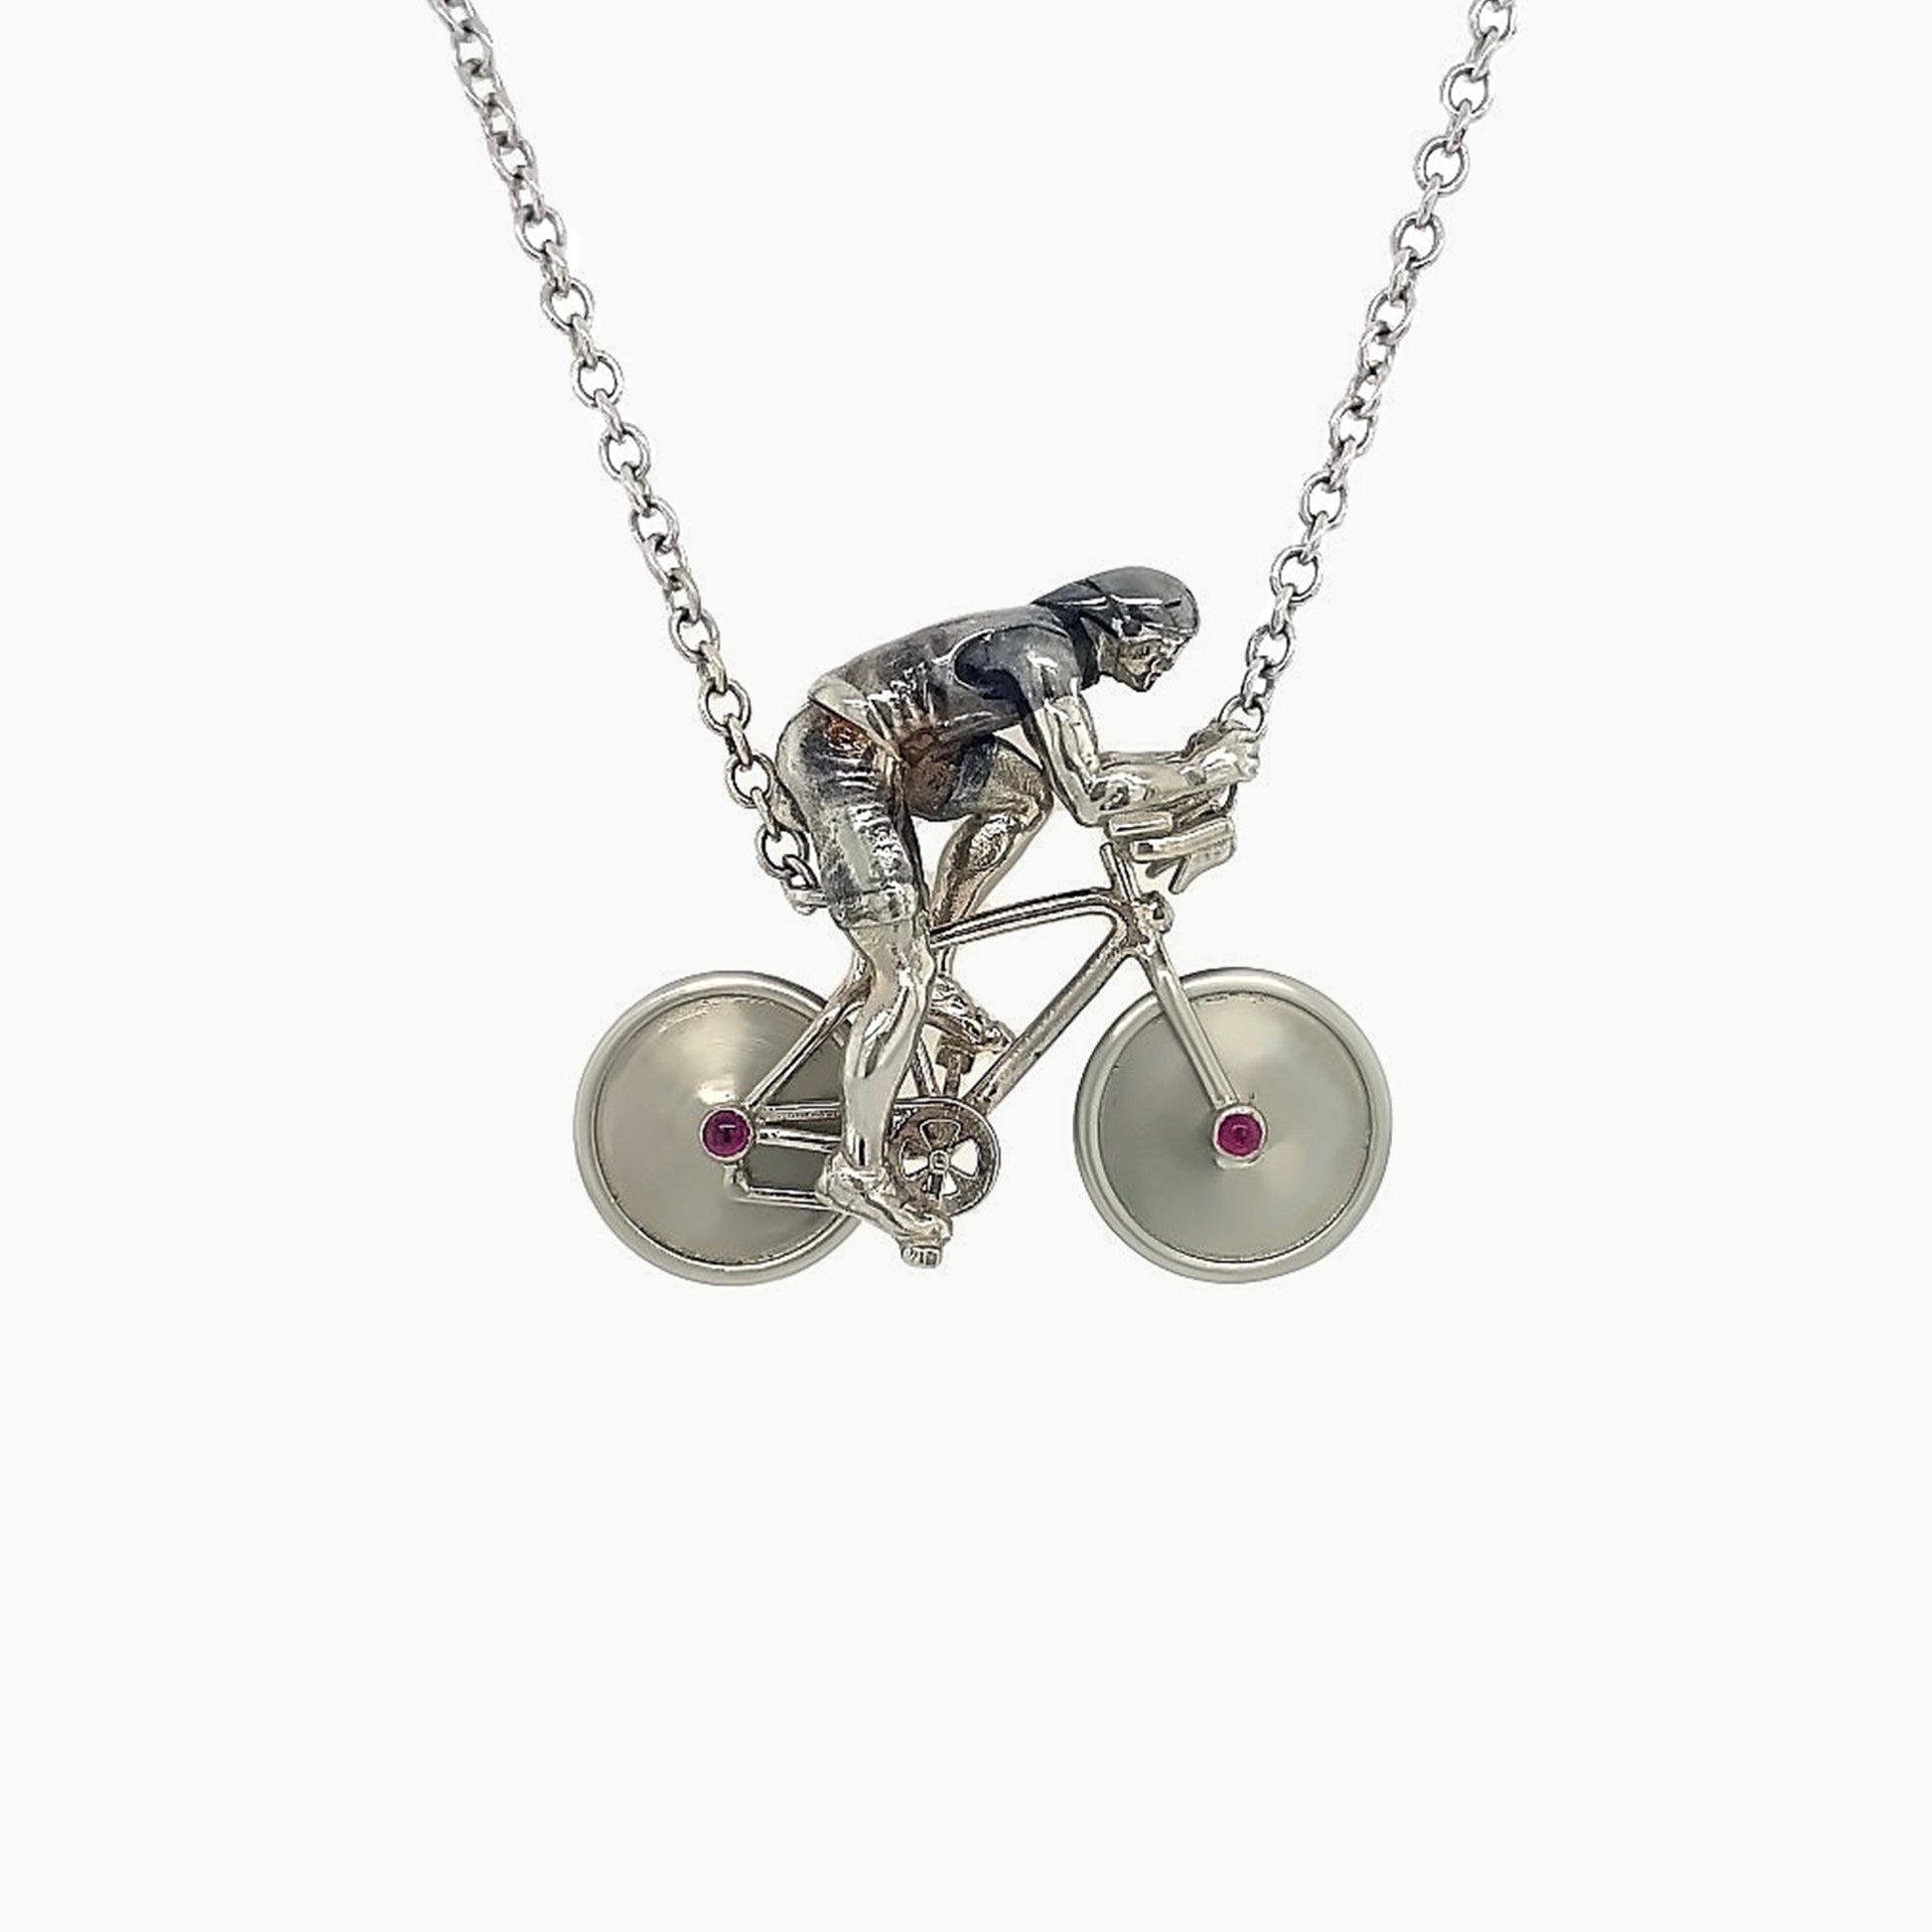 The Cyclist Gold Necklace on a white background